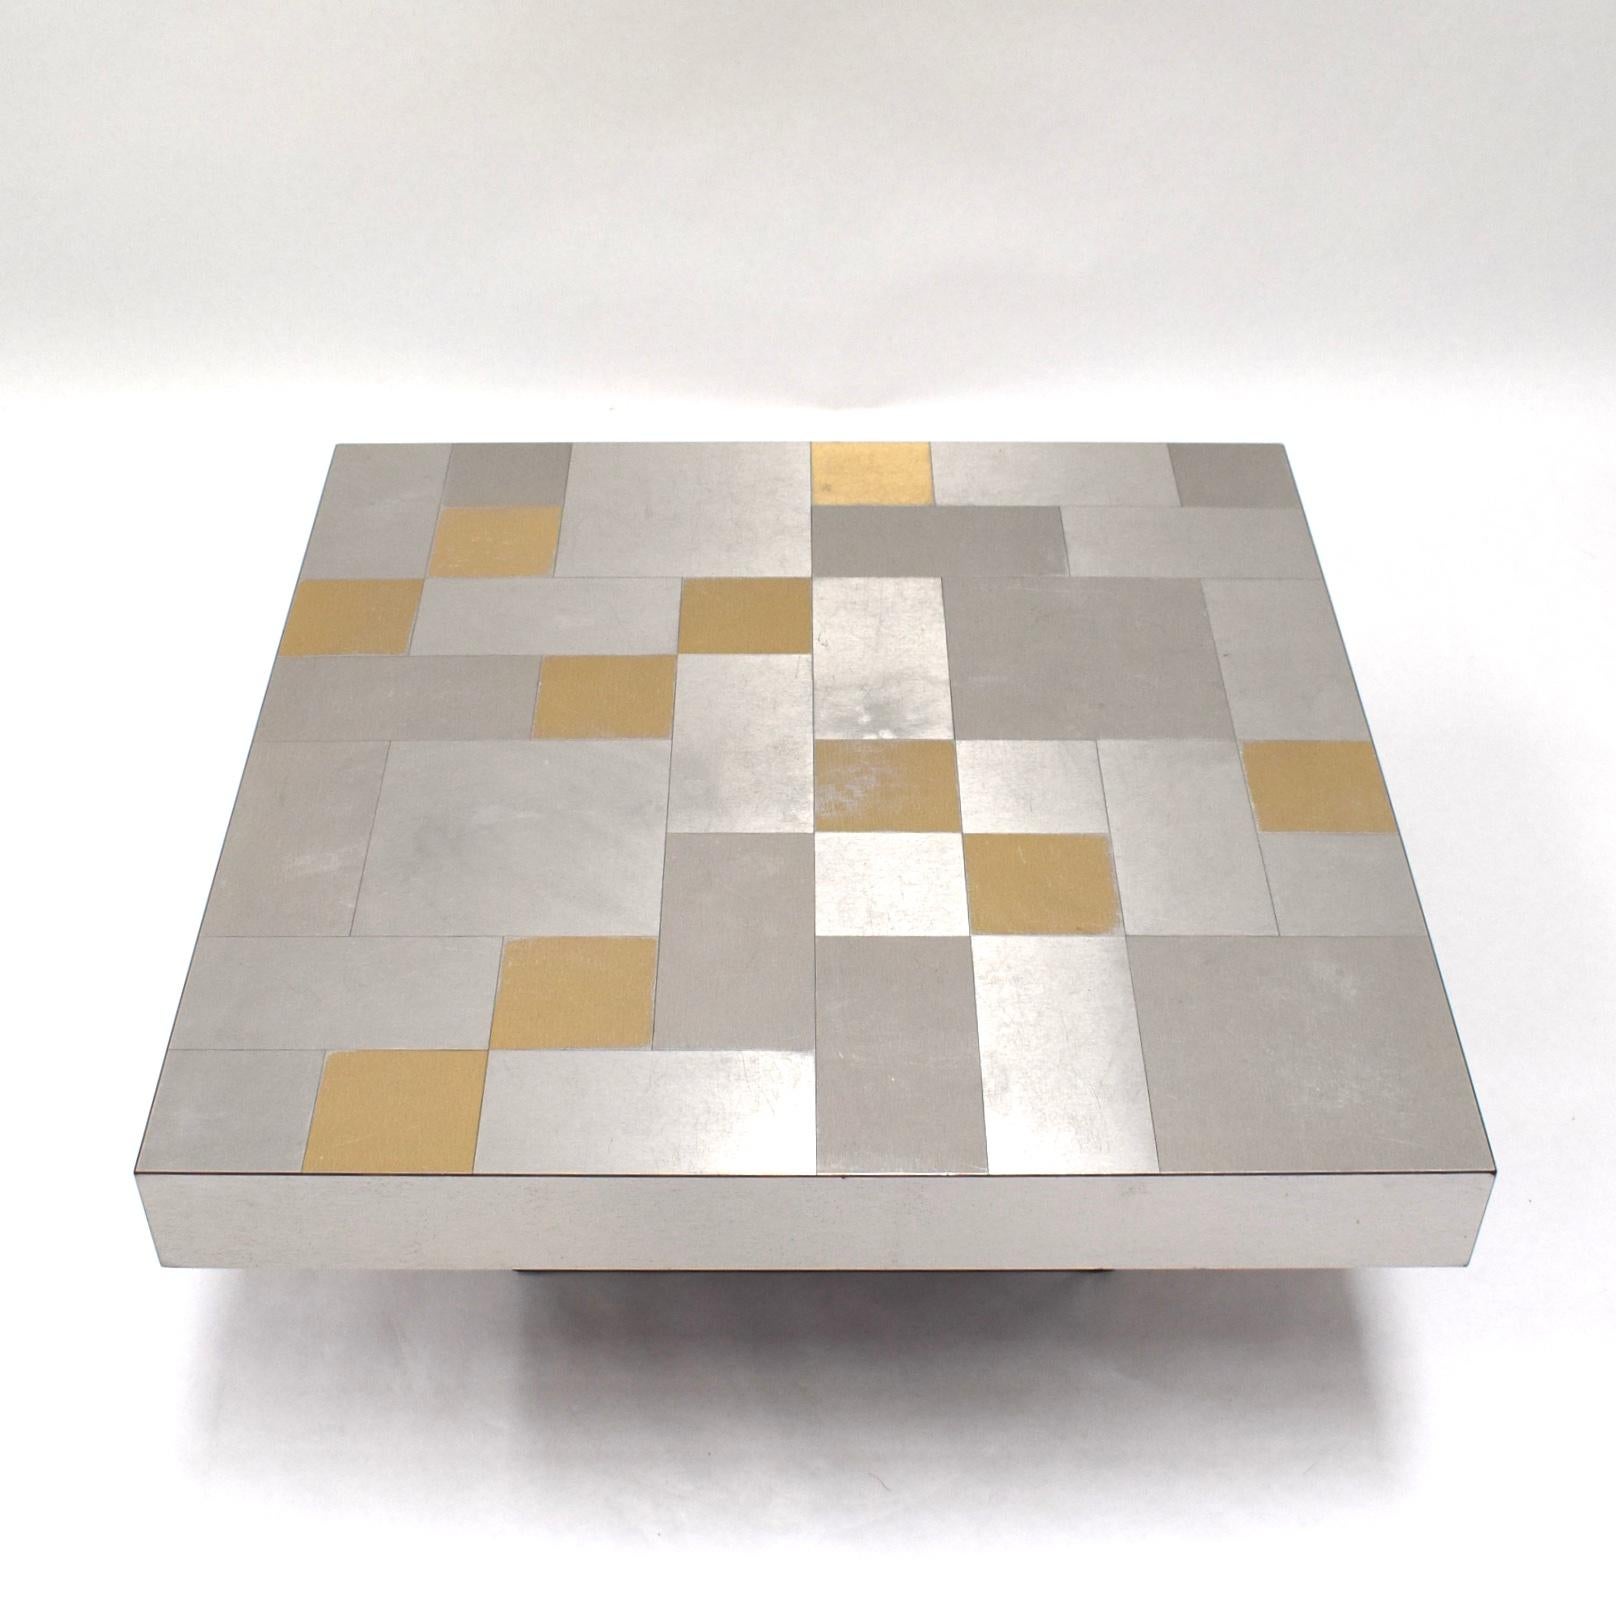 Late 20th Century 1970s Coffee Table with Aluminium Mosaic Top Gold and Silver Colored